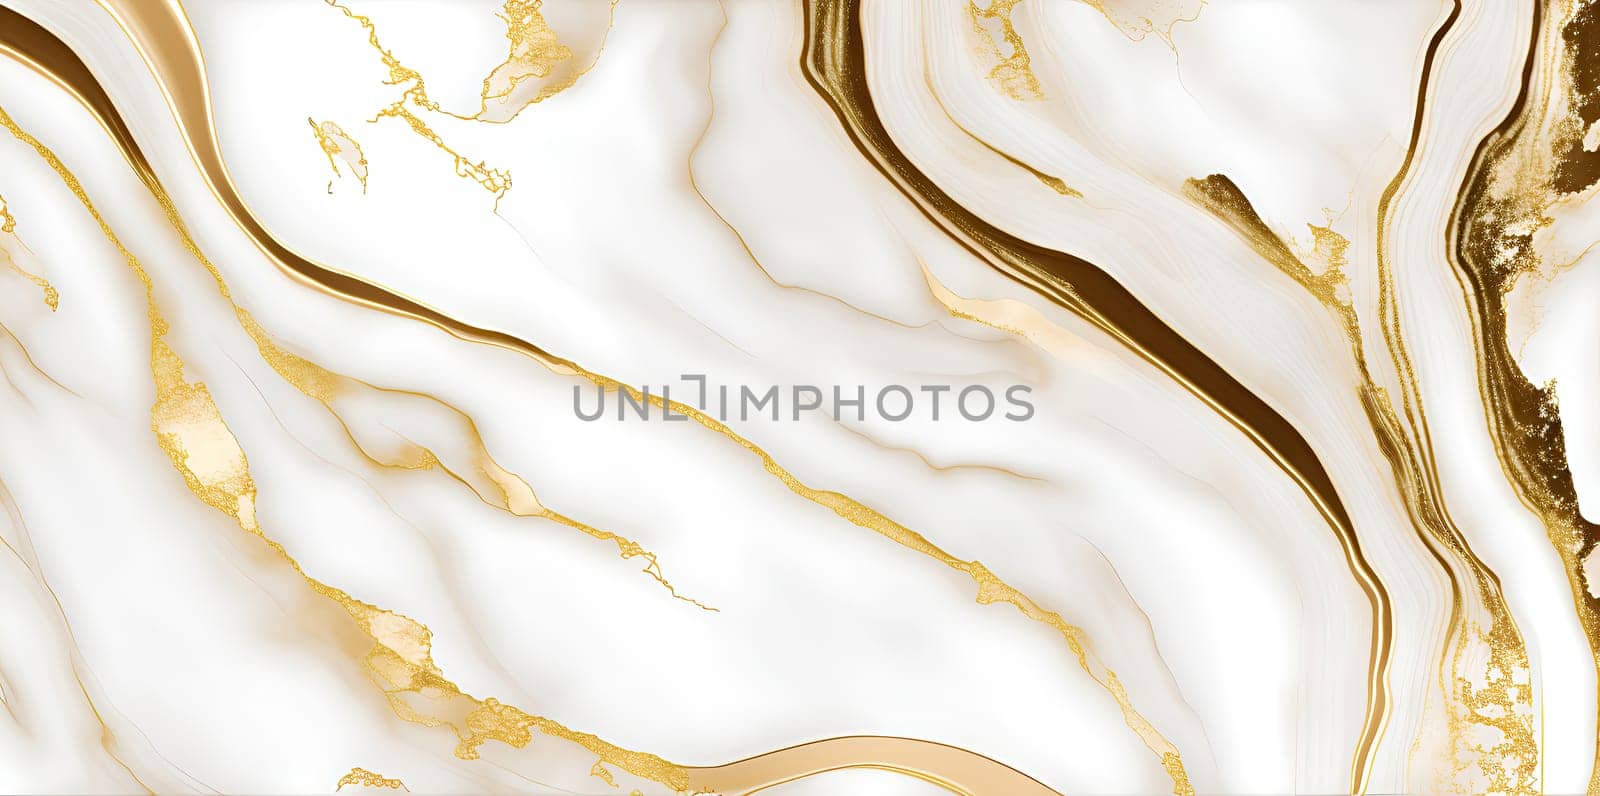 Marble wall texture for design art, stone banner, bright and luxurious. Soft focus.